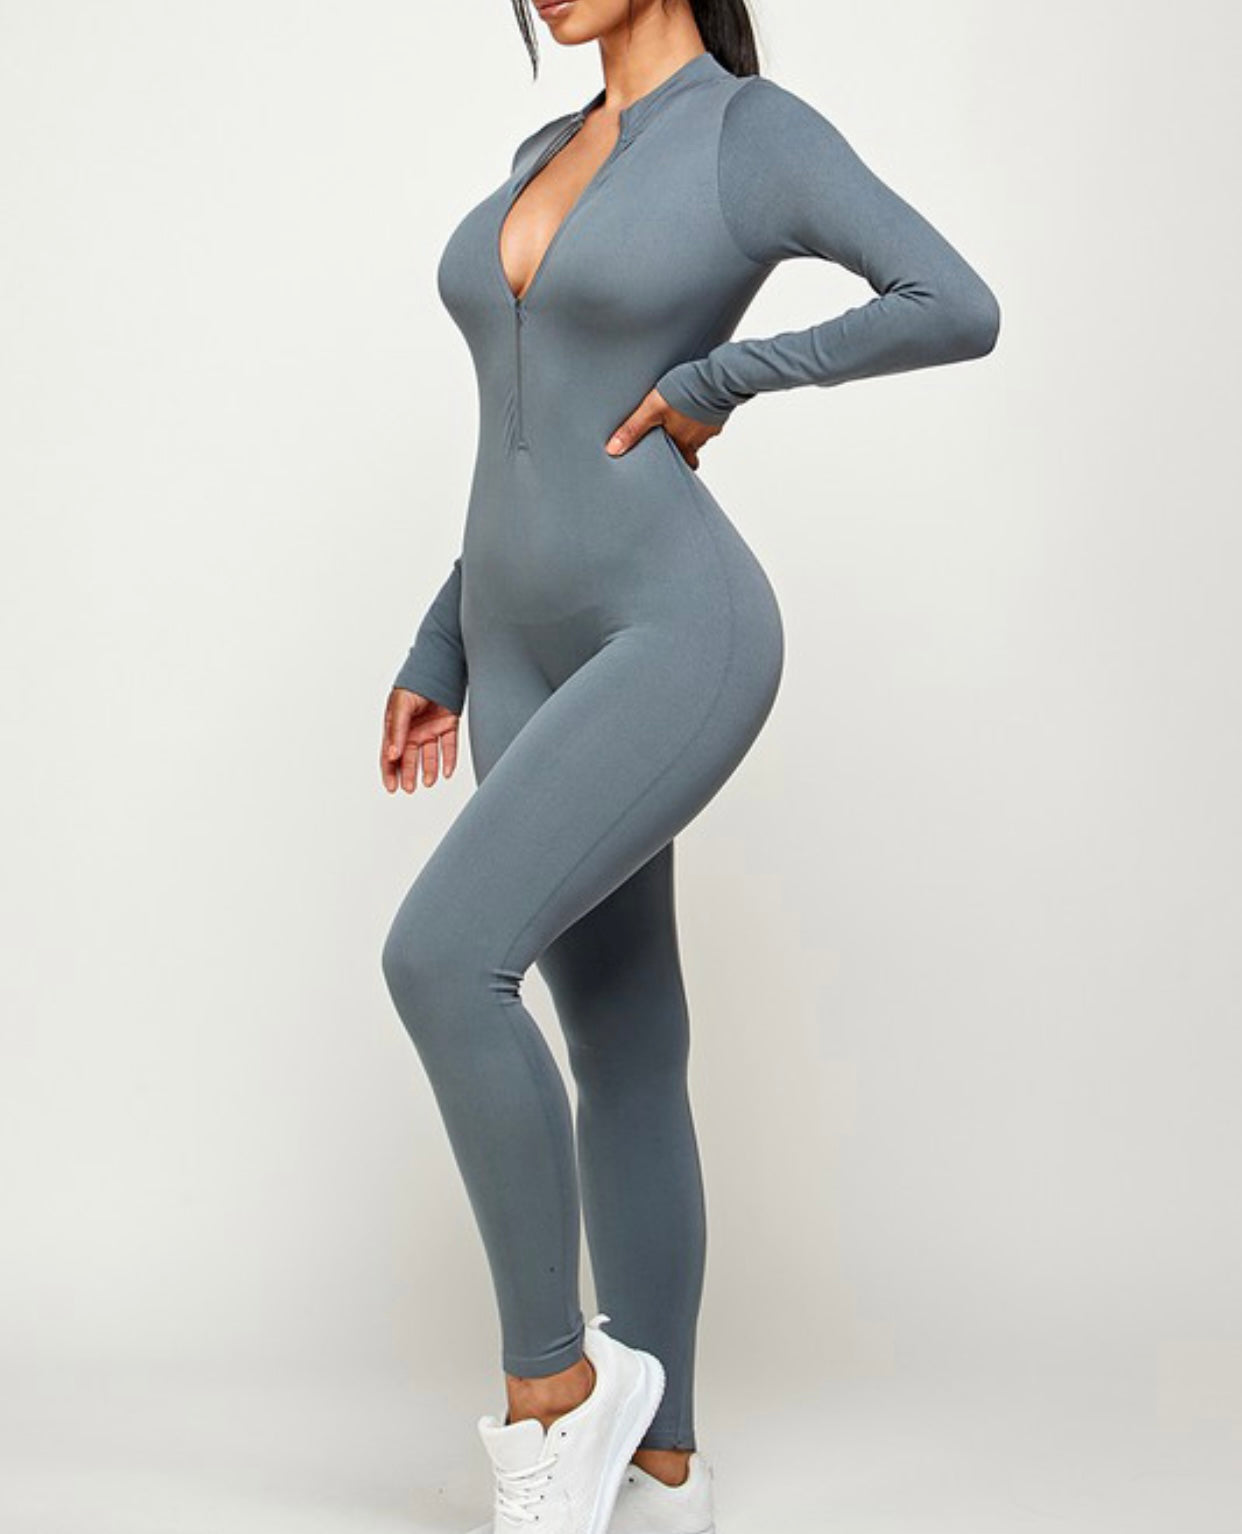 Target Colsie Seamless Grey Bodysuit L Gray Size L - $10 - From Christie